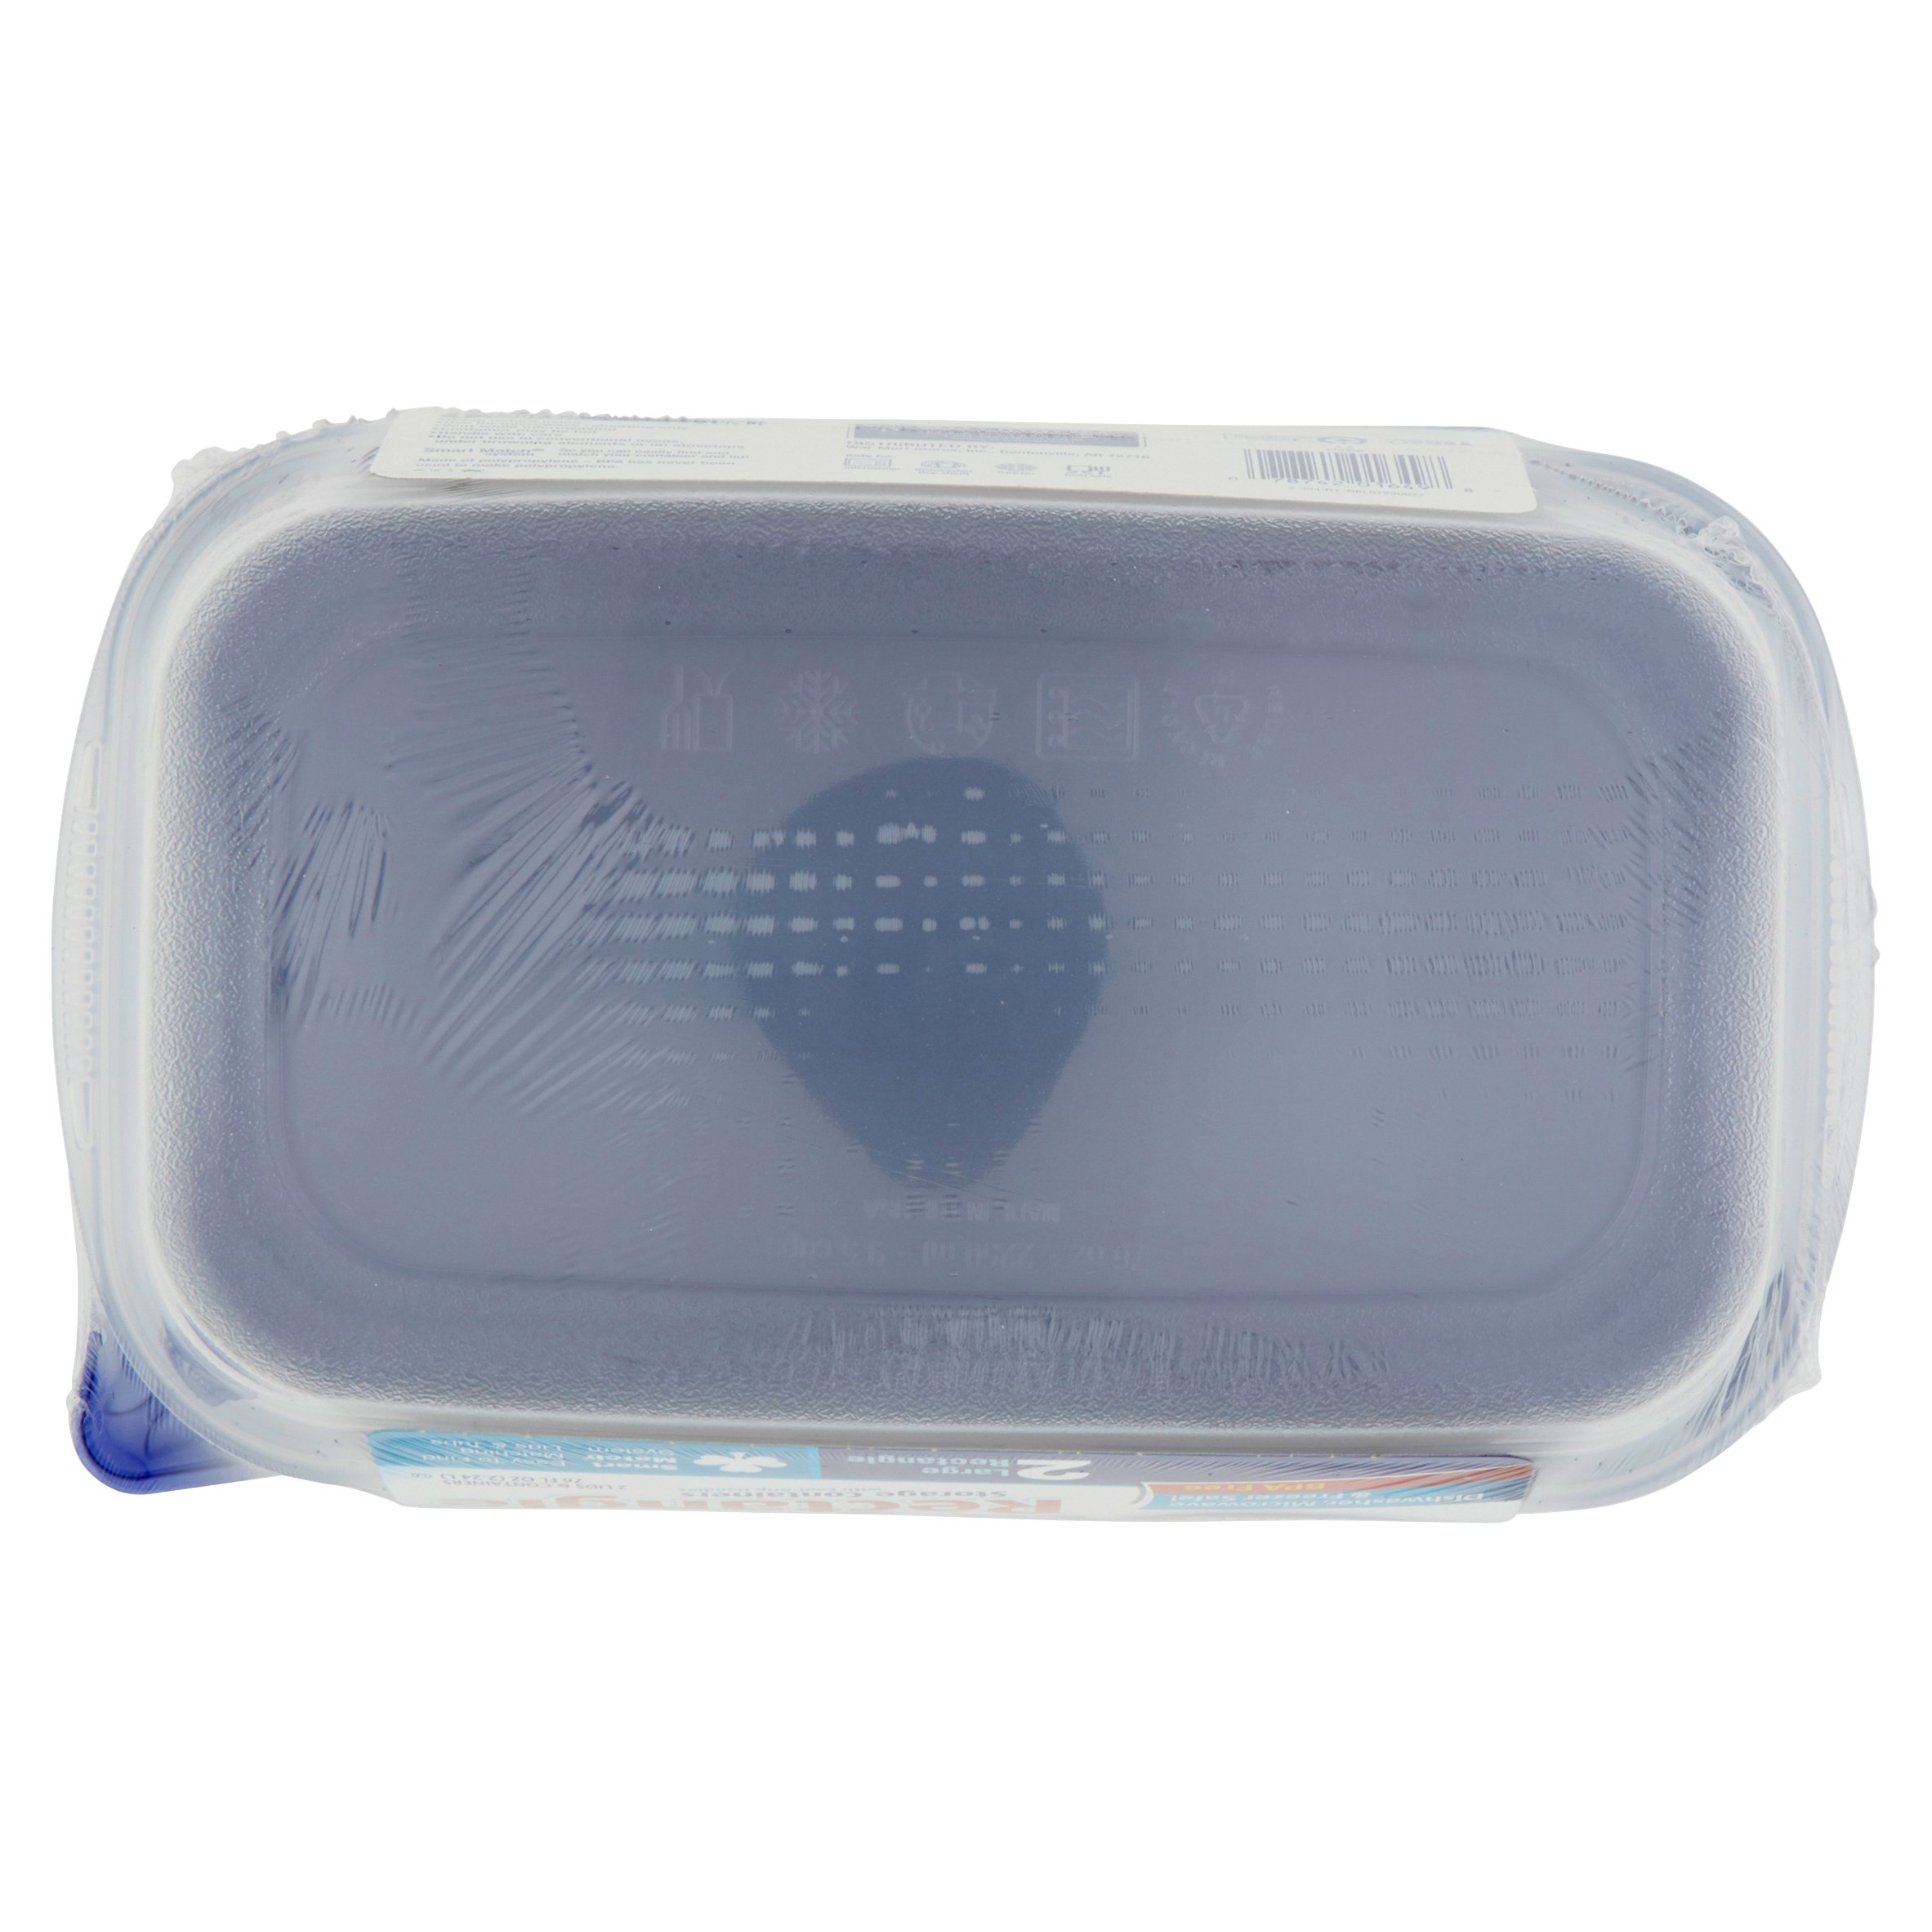 Great Value Take Outs Storage Container, BPA Free, Large Rectangle, 2 Count - image 4 of 5